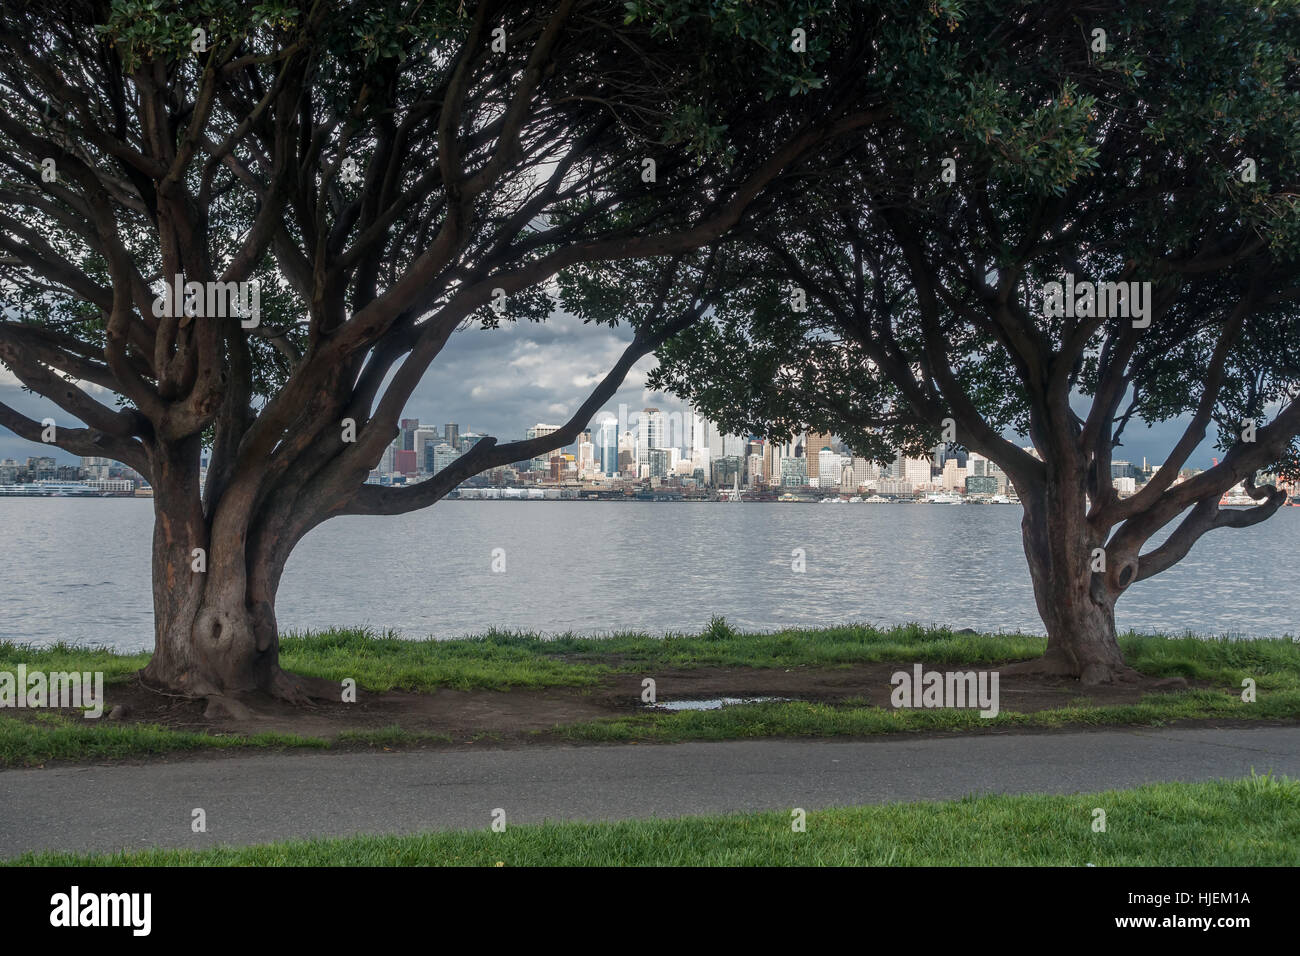 The Seattle skyline can be seen behind two trees. Stock Photo